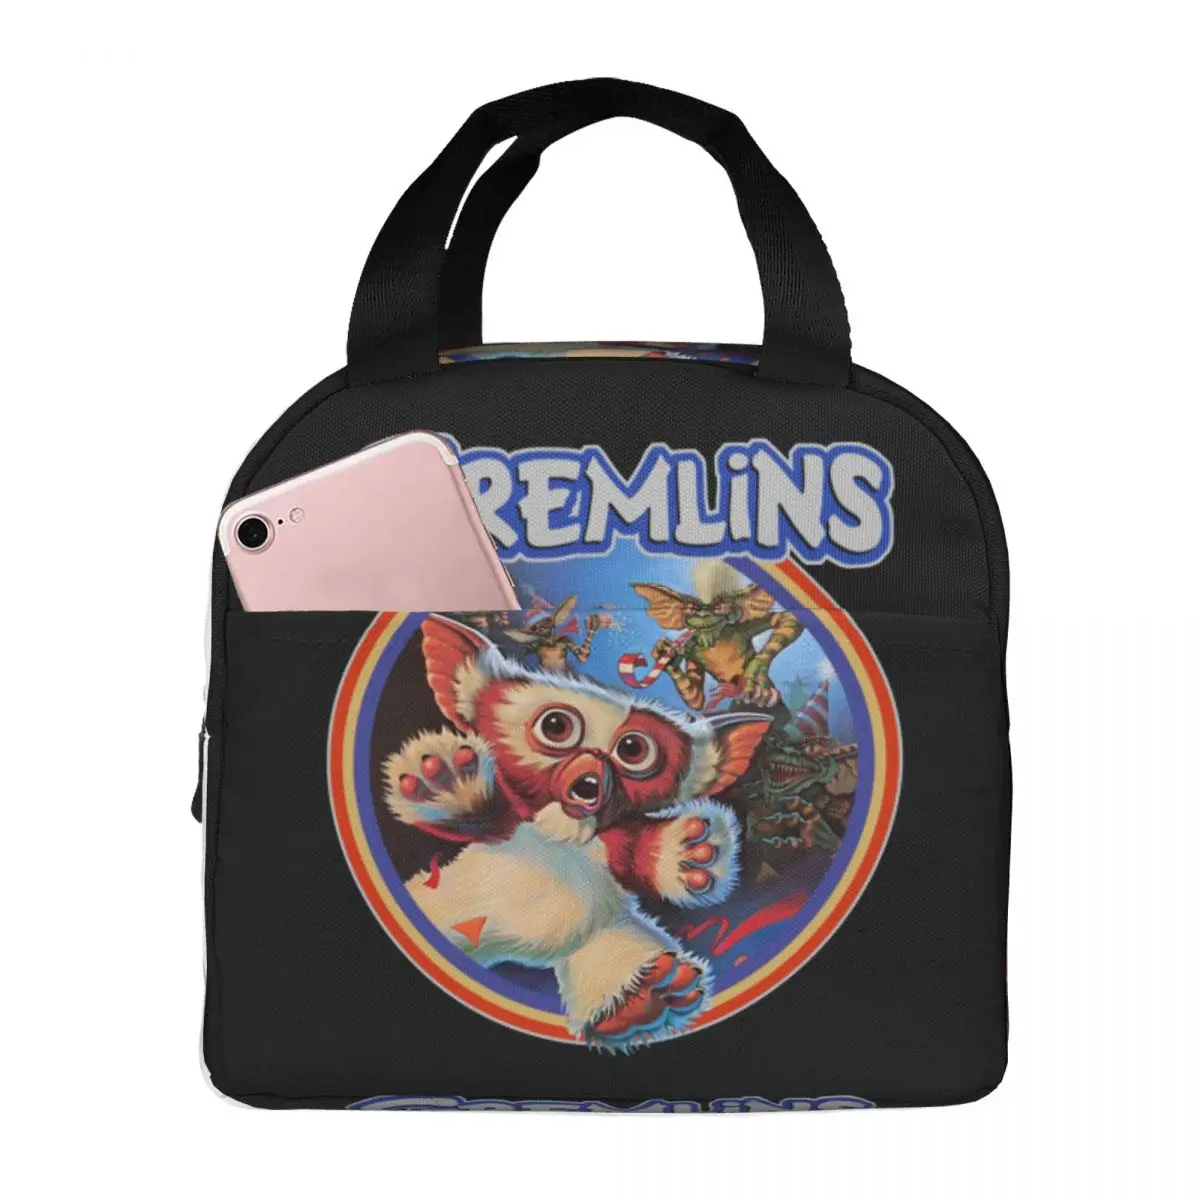 Gremlin 84 Lunch Bag Portable Insulated Canvas Cooler Bag Mogwai Monster Thermal Cold Food Picnic Lunch Box for Women Kids